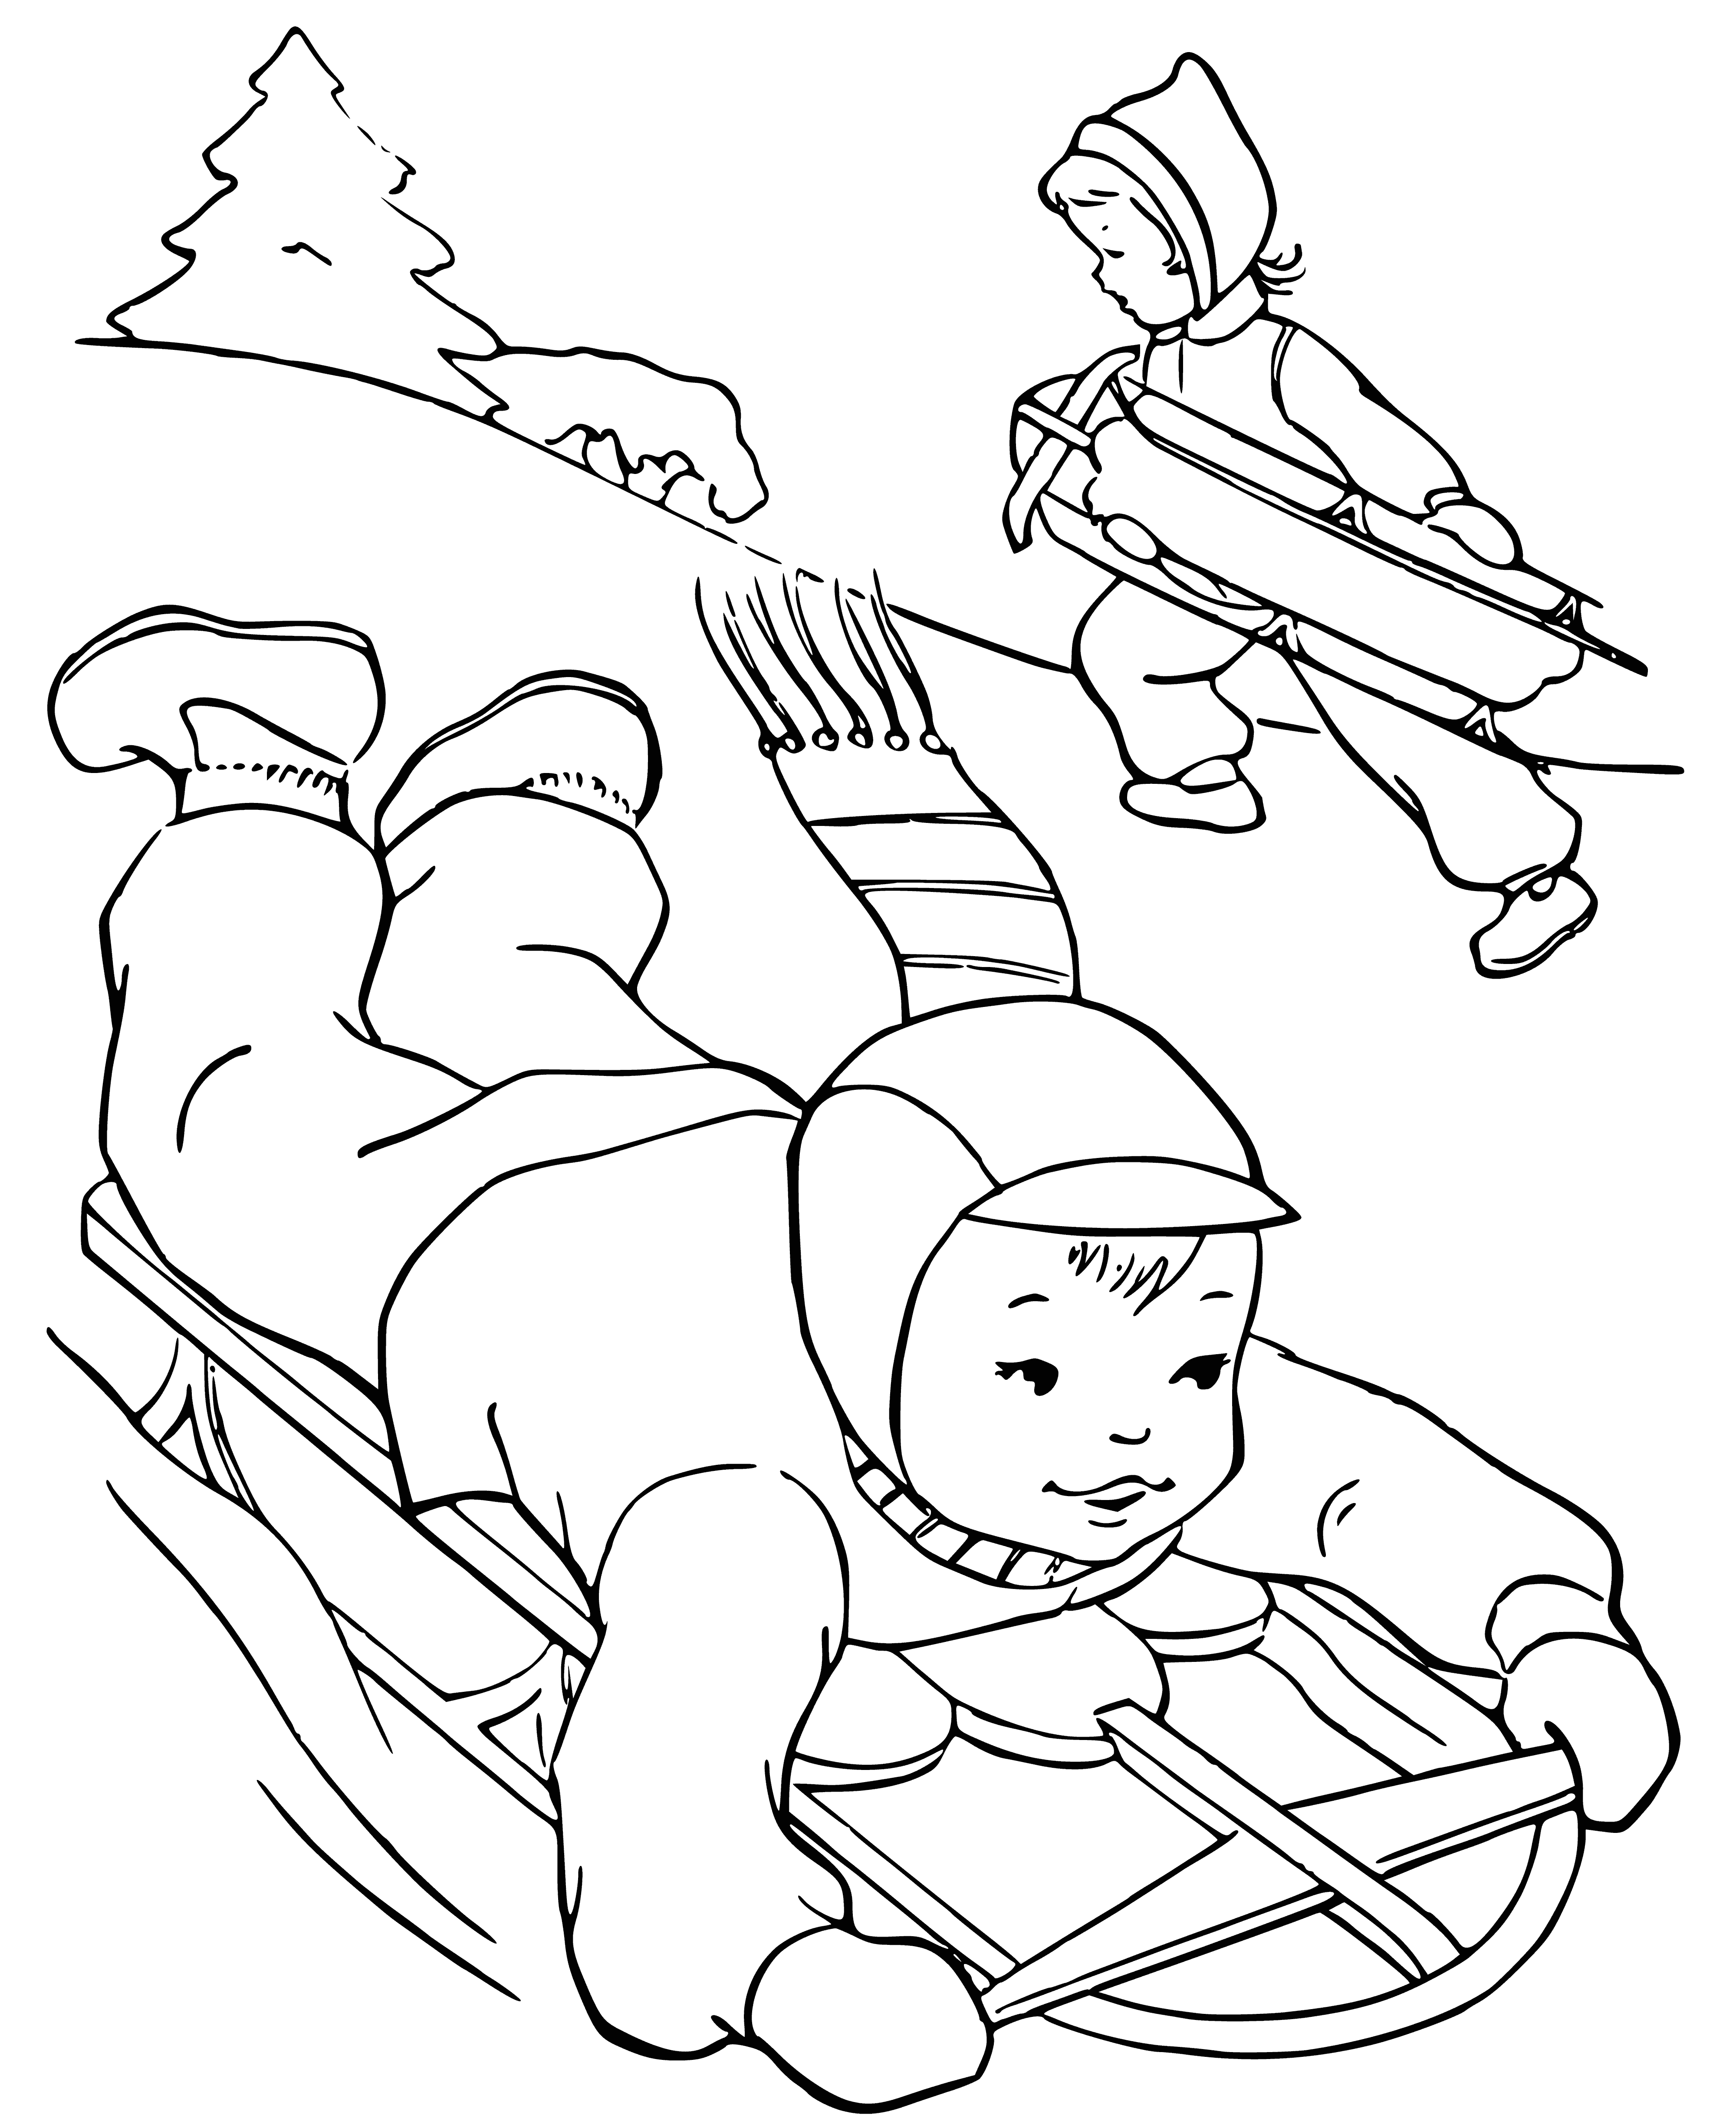 Toddler on a sled coloring page